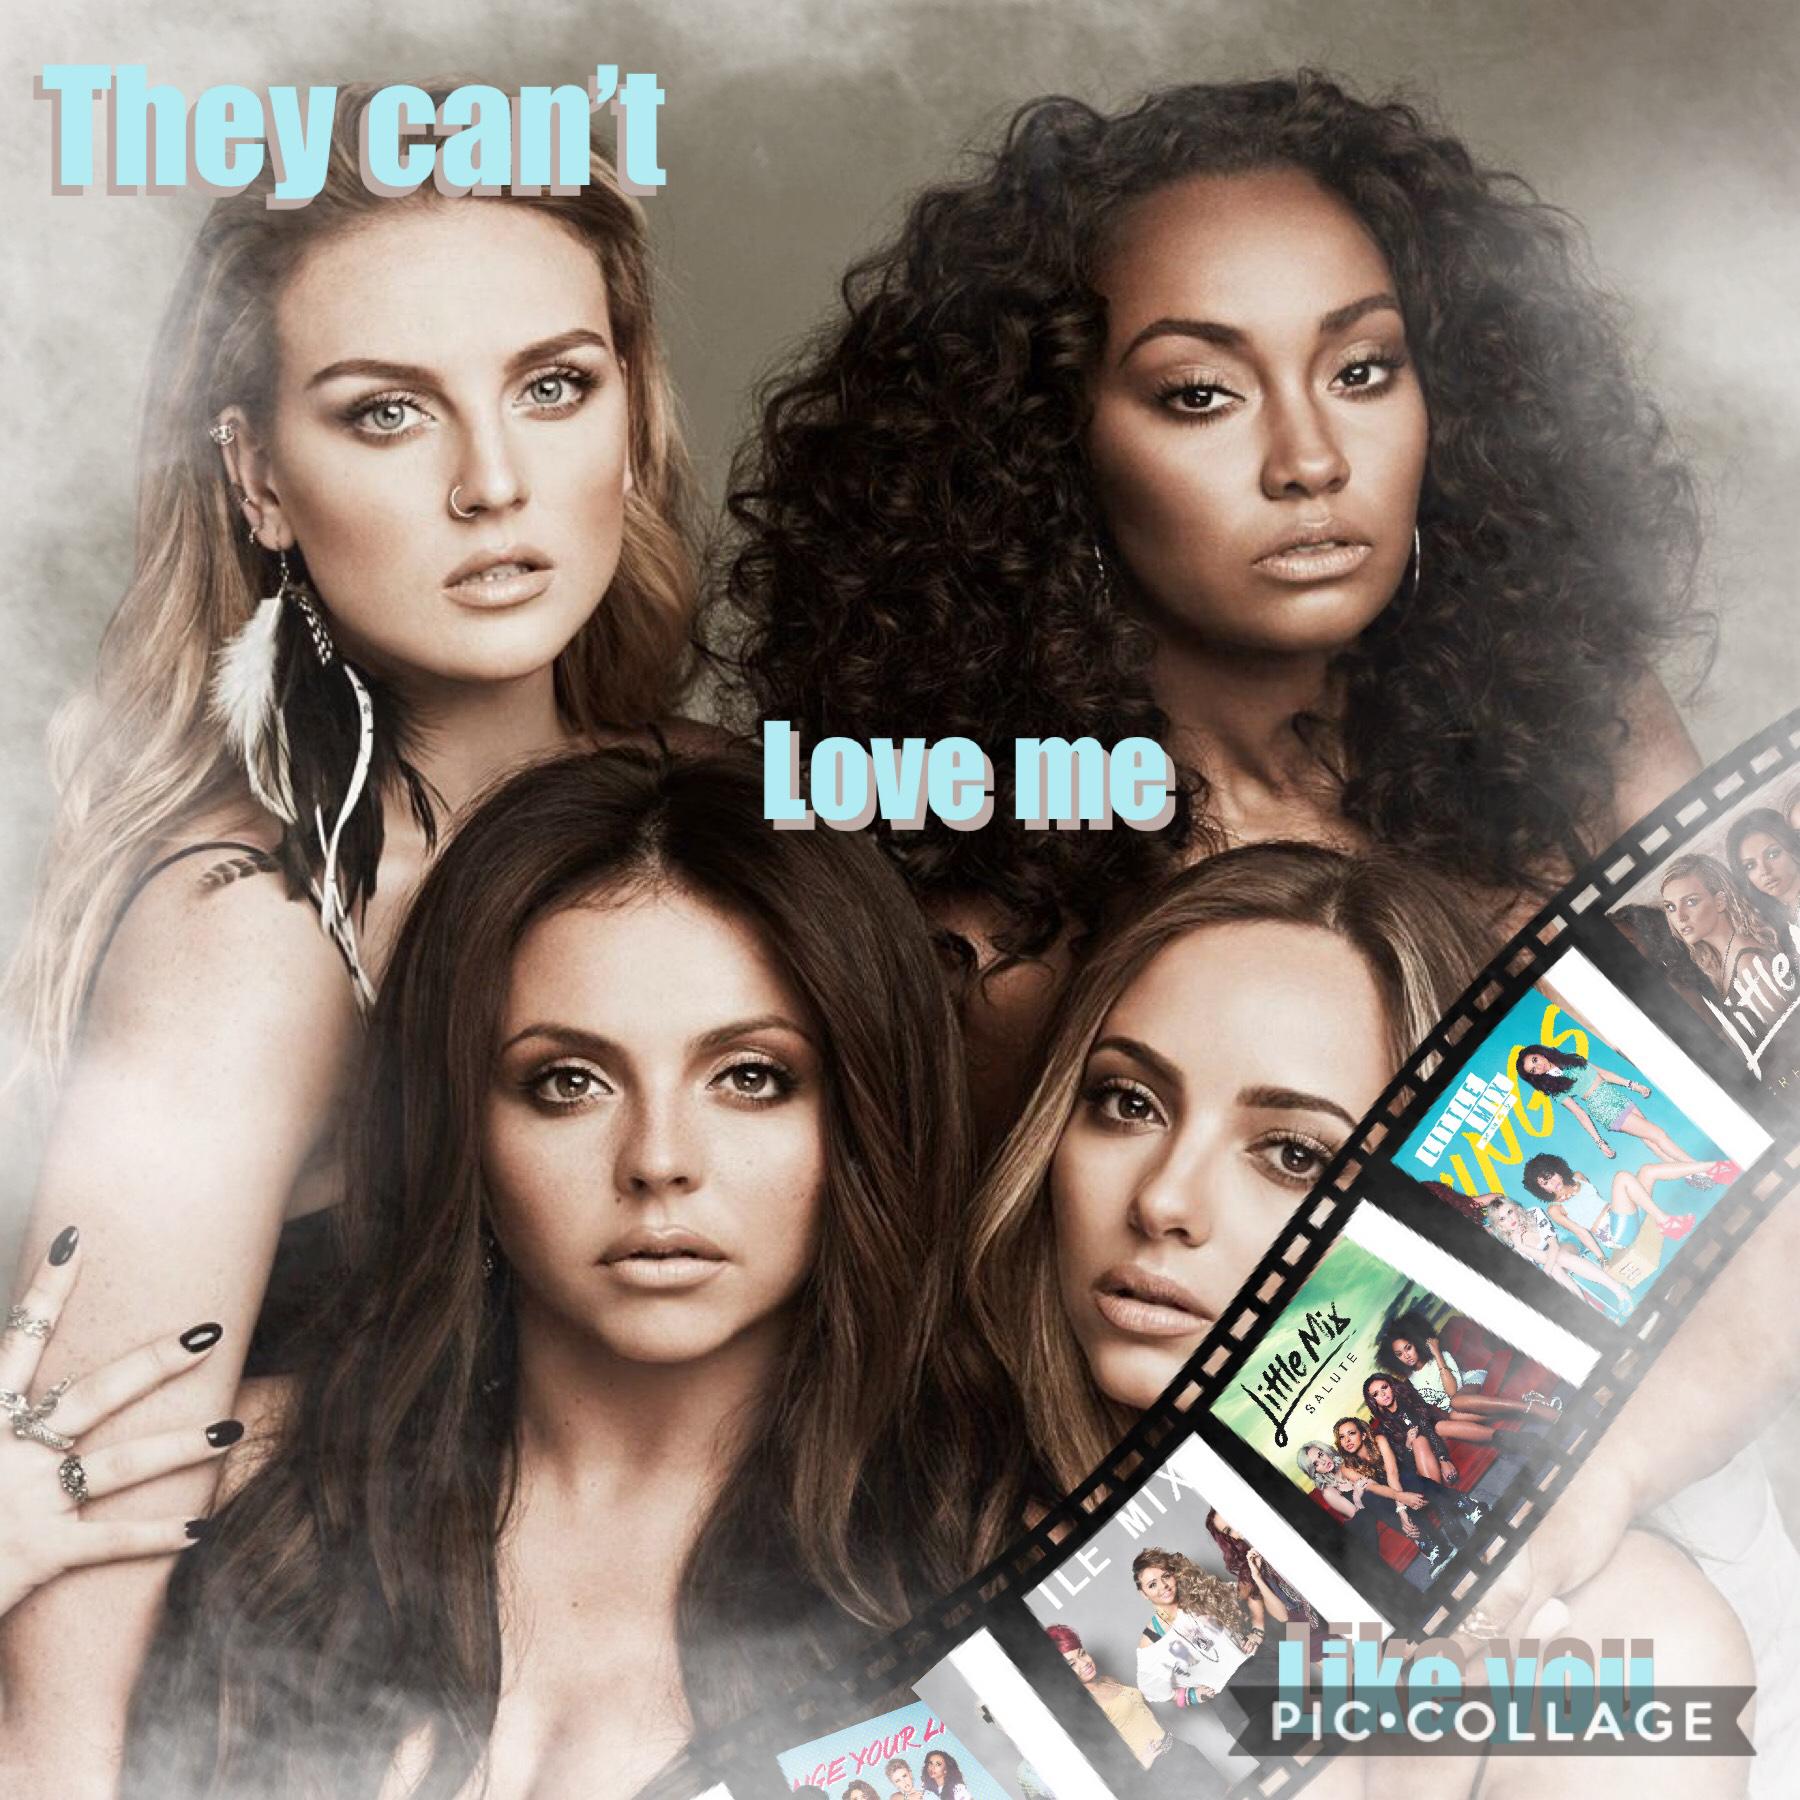 🥀TAPPP🥀



Anyone listen to little mix? IF NOT LISTEN TO THEM😂😂 they’re all abt women power❤️❤️❤️ i need to laugh I’m crying so hard rn...